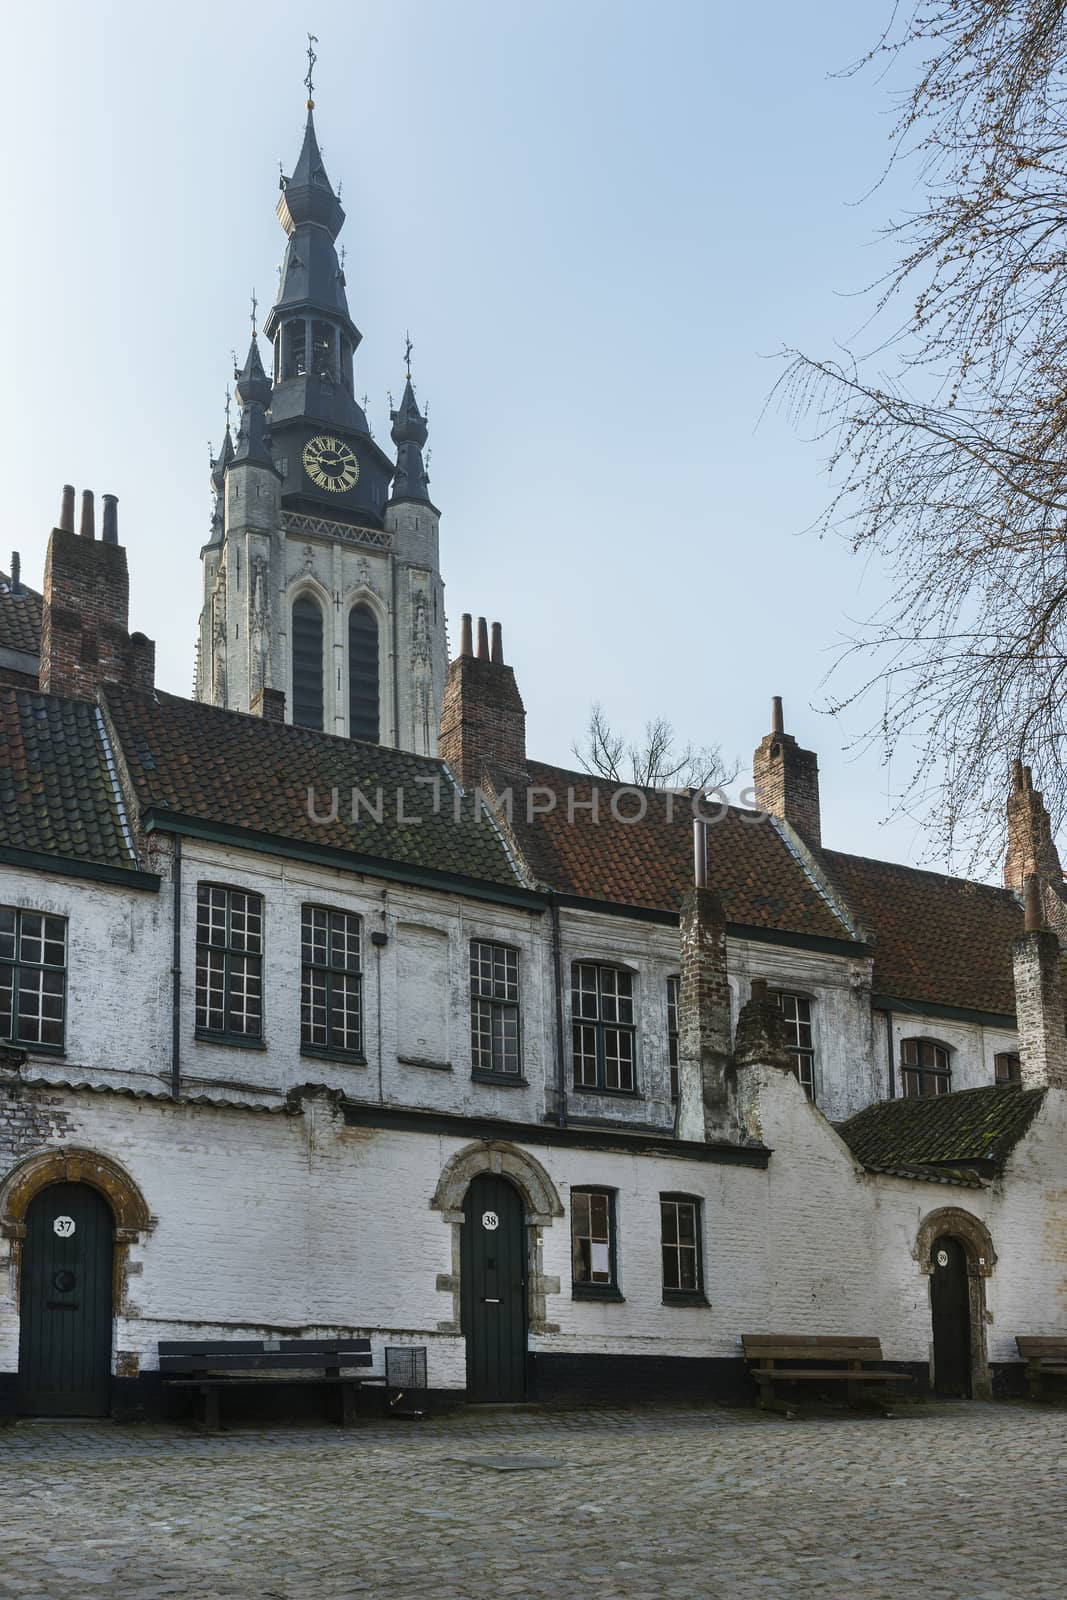 Kortrijk Beguinage and the tower of St. Martin's (Maarten) churc by Claudine